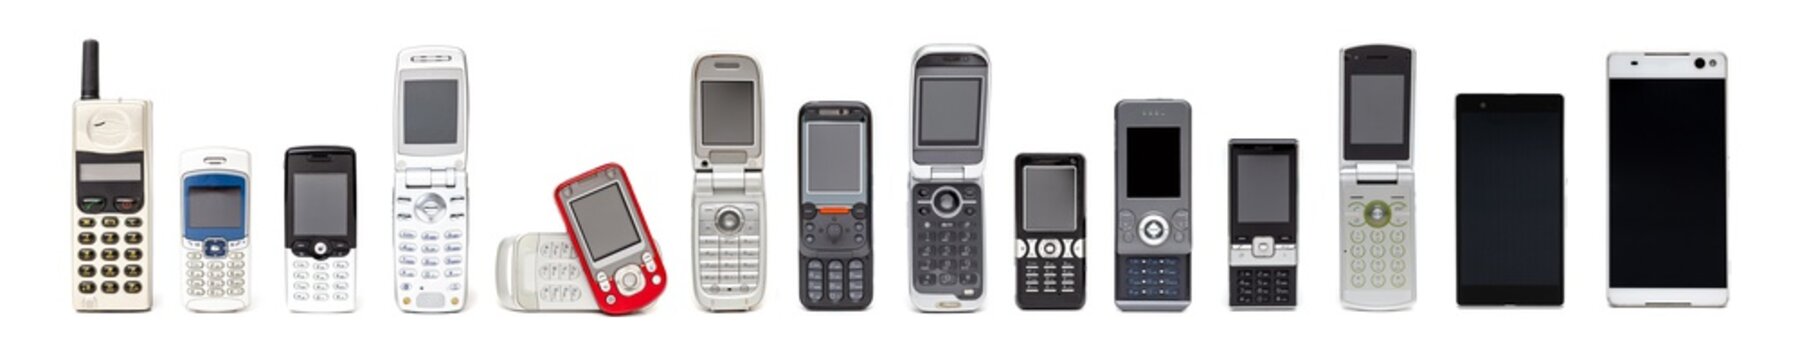 Old mobile phones from past to present on white background.